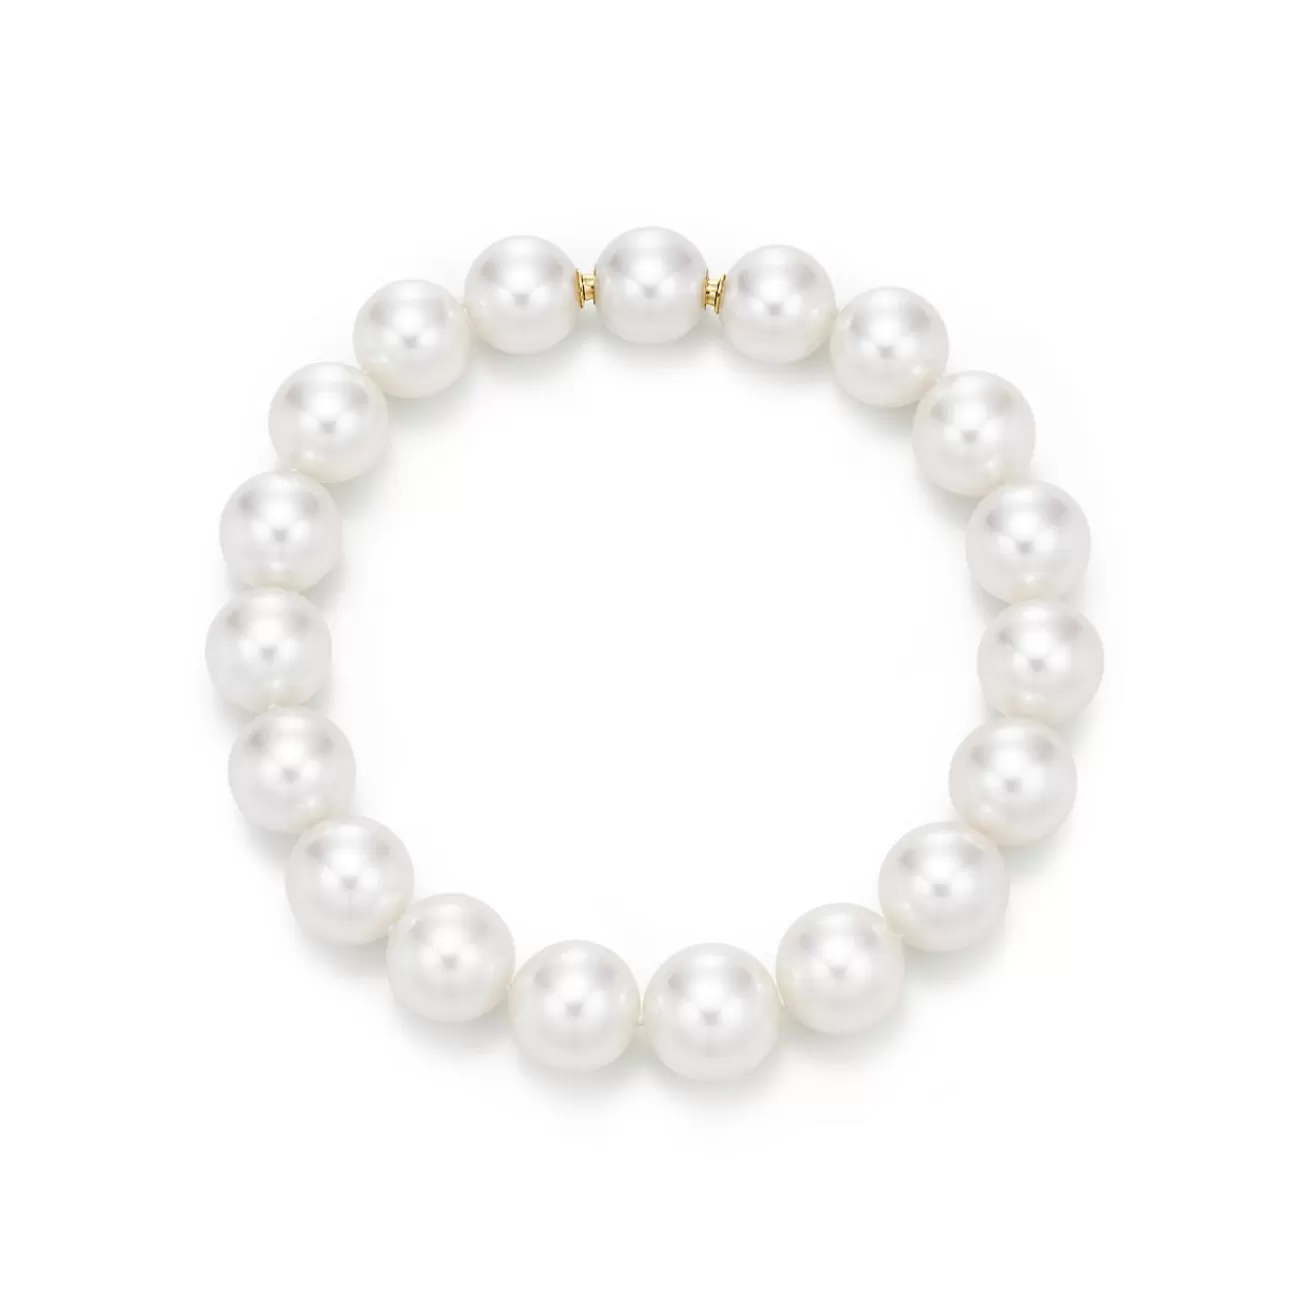 Tiffany & Co. Tiffany South Sea Noble bracelet of cultured pearls with an 18k gold clasp. | ^ Bracelets | Gold Jewelry